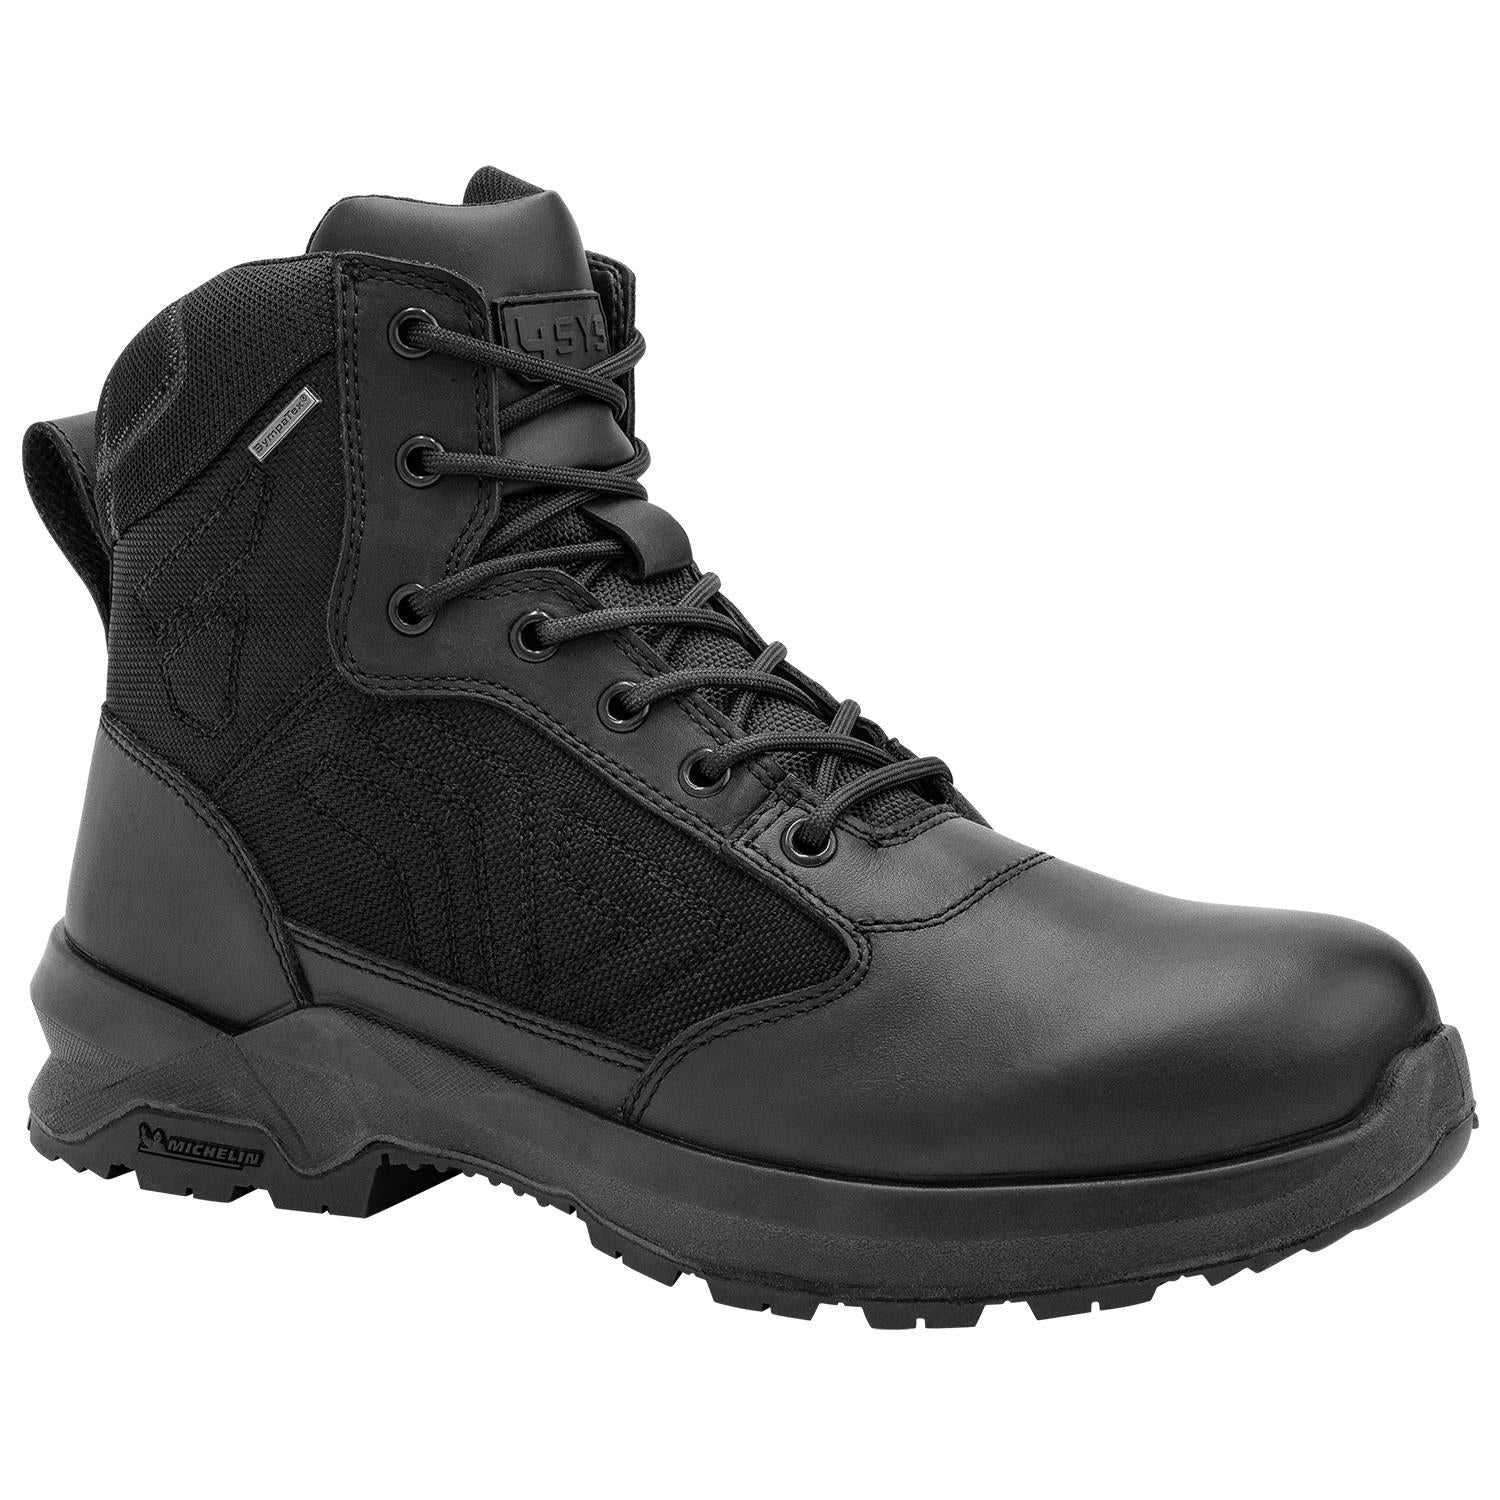 4SYS RADIAL 6.0 black leather/nylon scanner-safe waterproof combat patrol boot